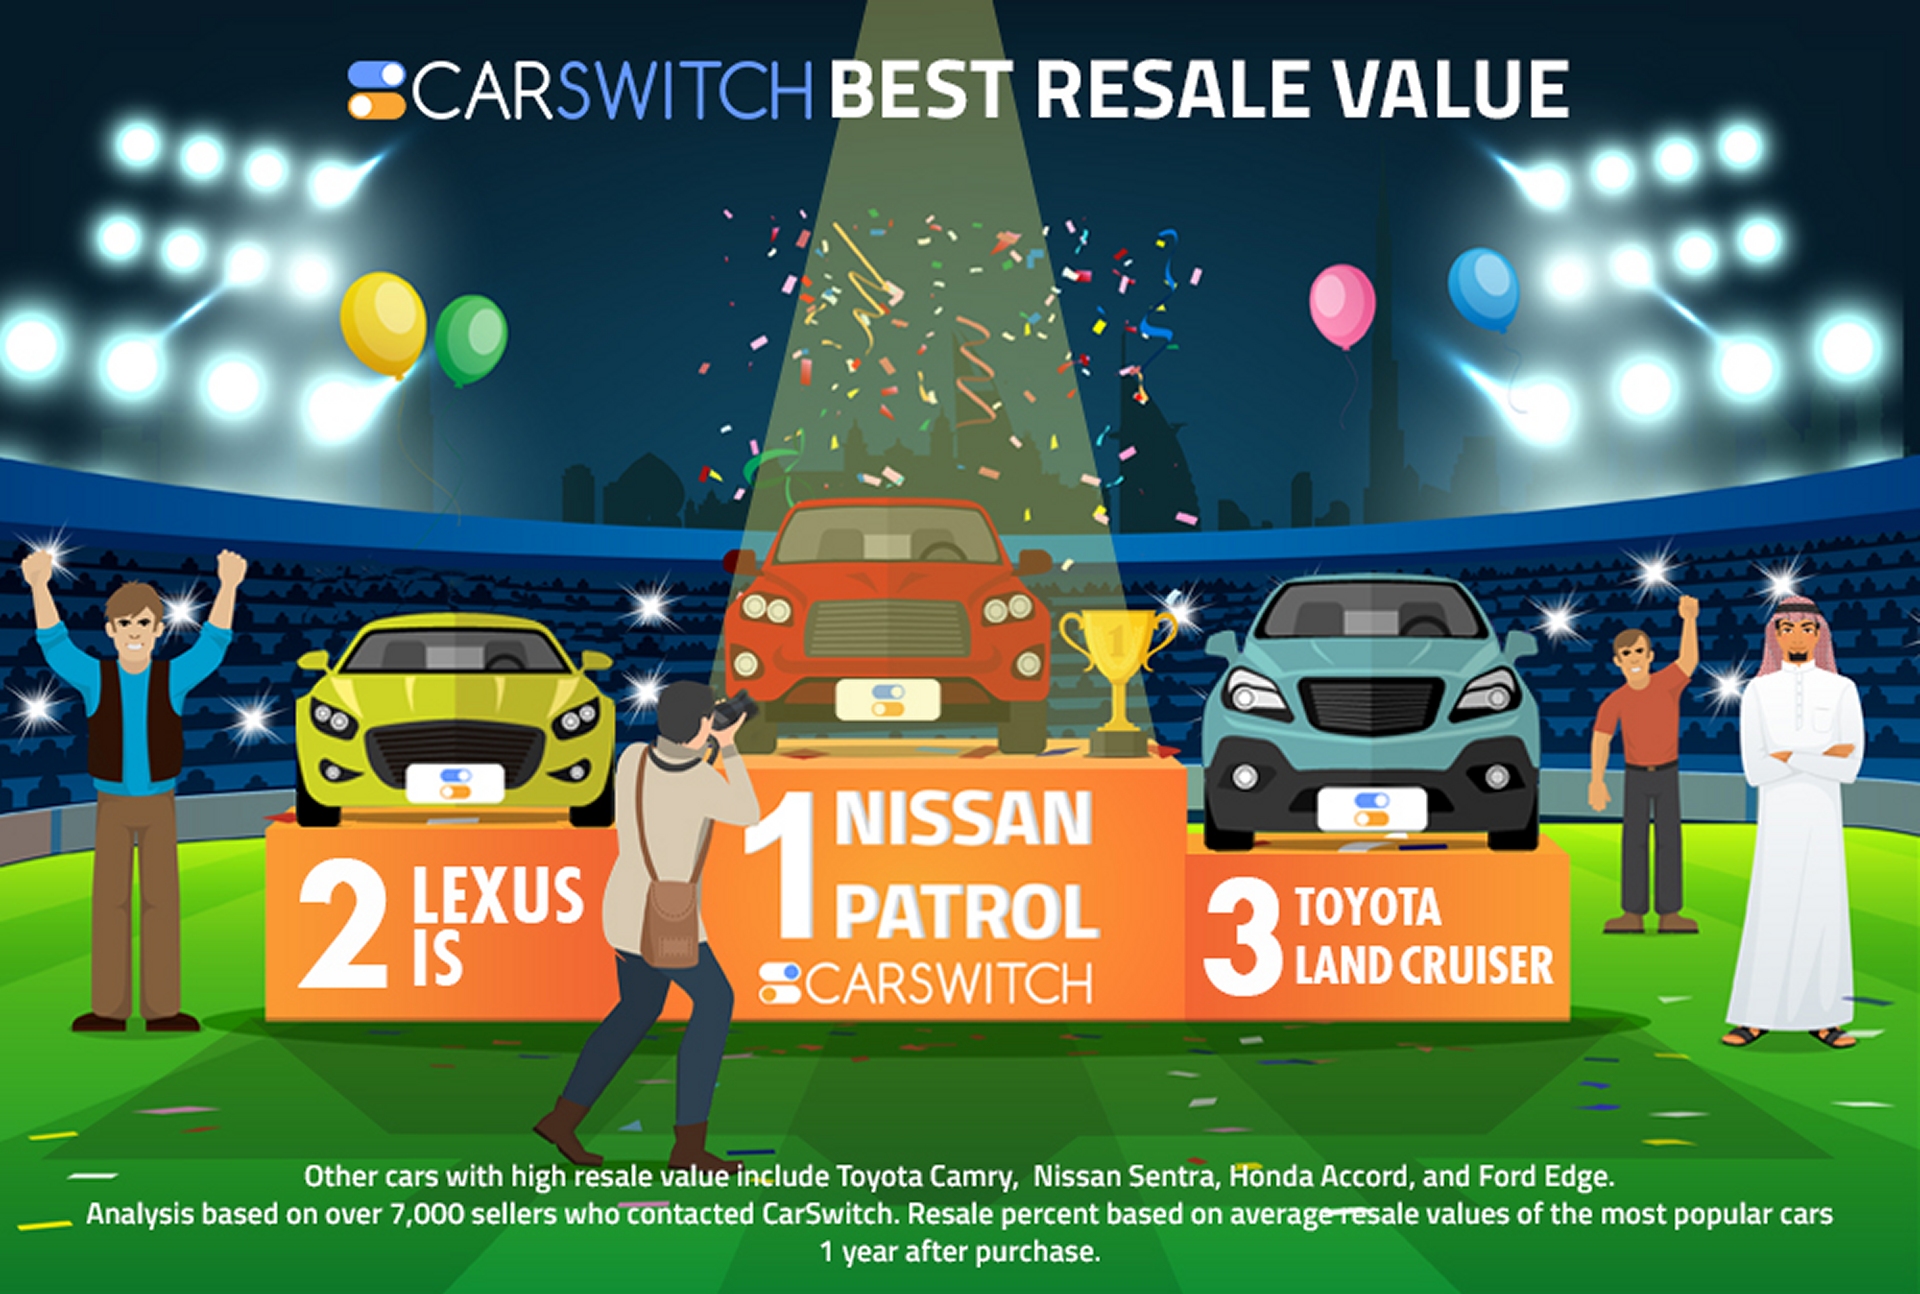 CarSwitch.com - Highest Resale Value In The UAE - Top 3